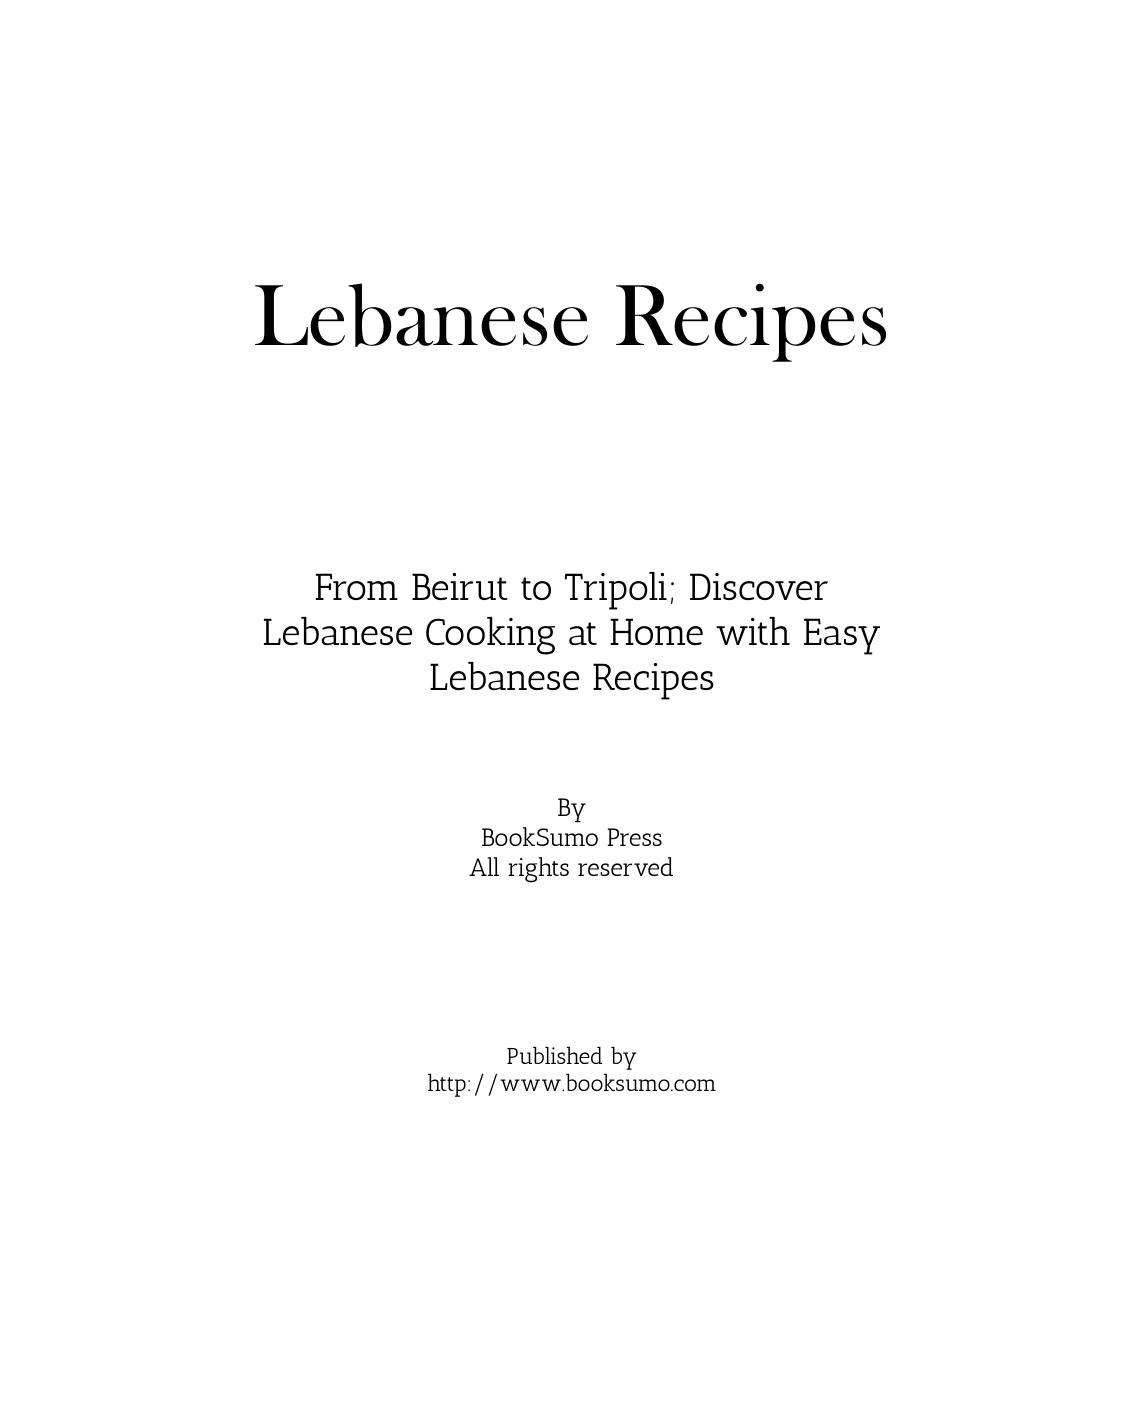 Lebanese Recipes: From Beirut to Tripoli; Discover Arab Cooking at Home with Easy Lebanese Meals by BookSumo Press